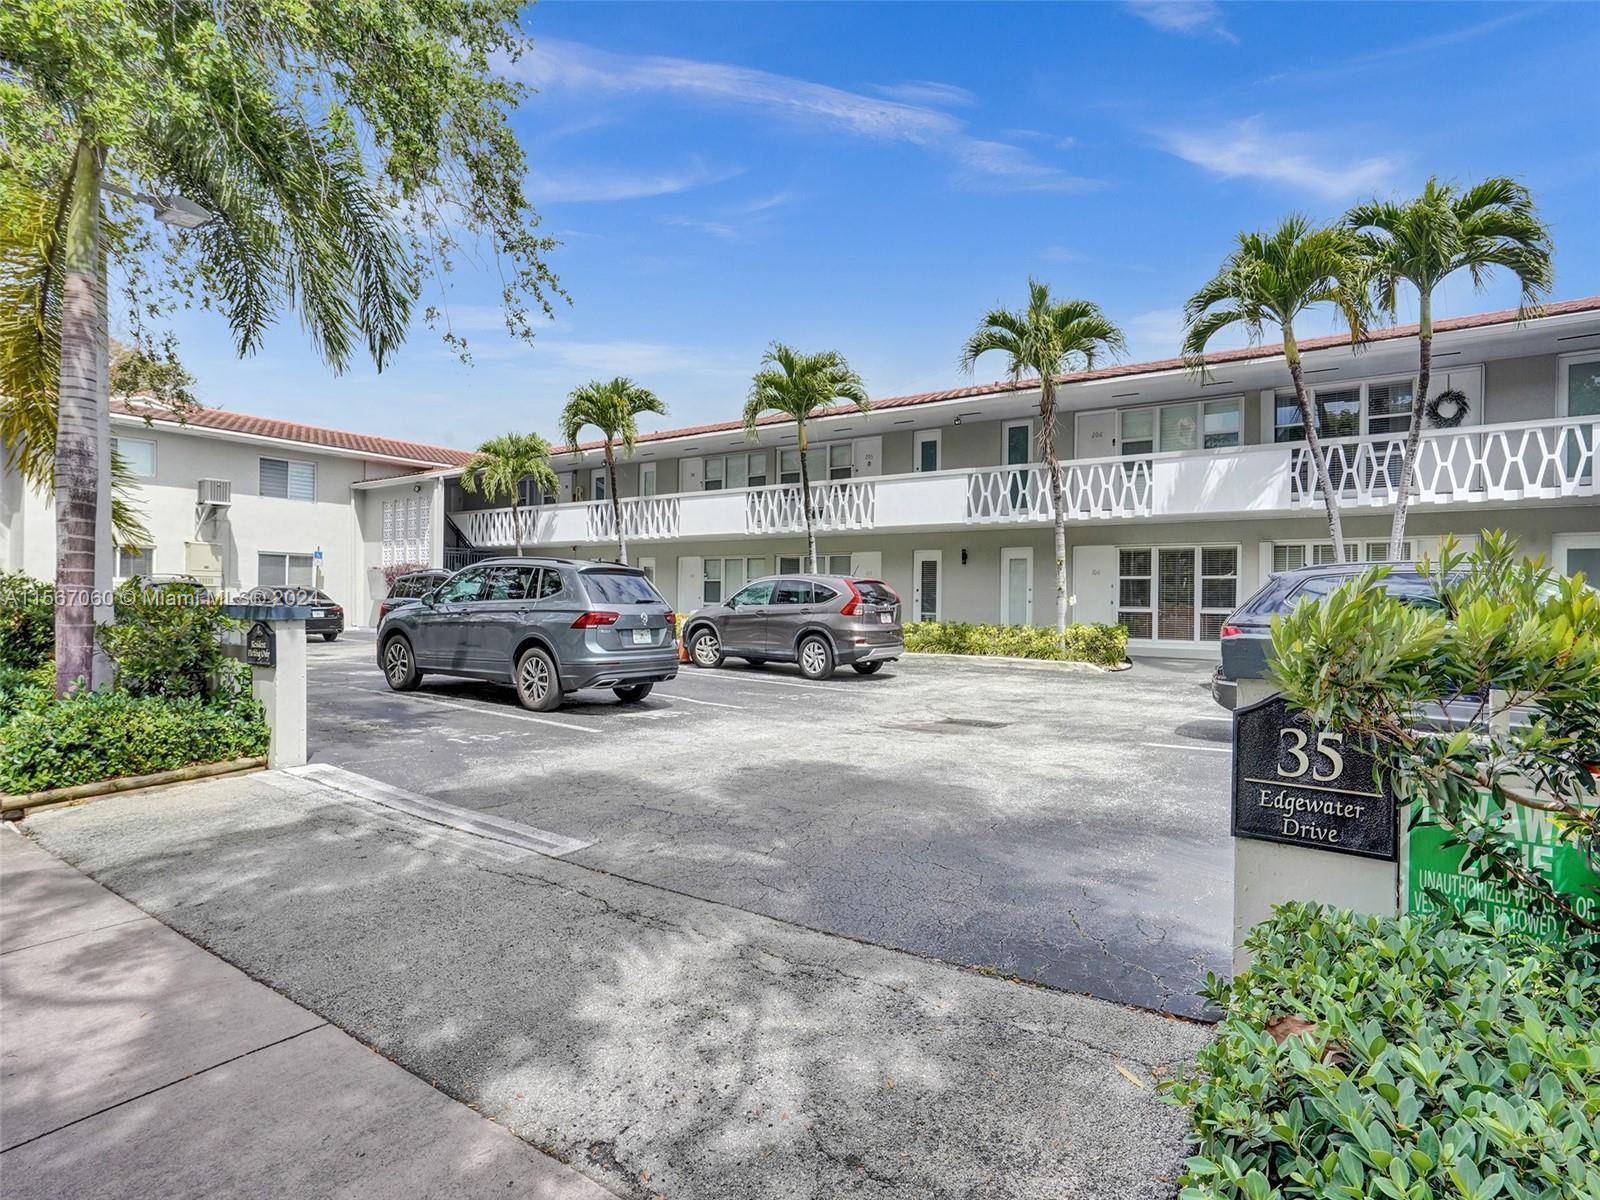 Spacious second floor 2 bed 1 bath condo on Edgewater Drive in Coral Gables.